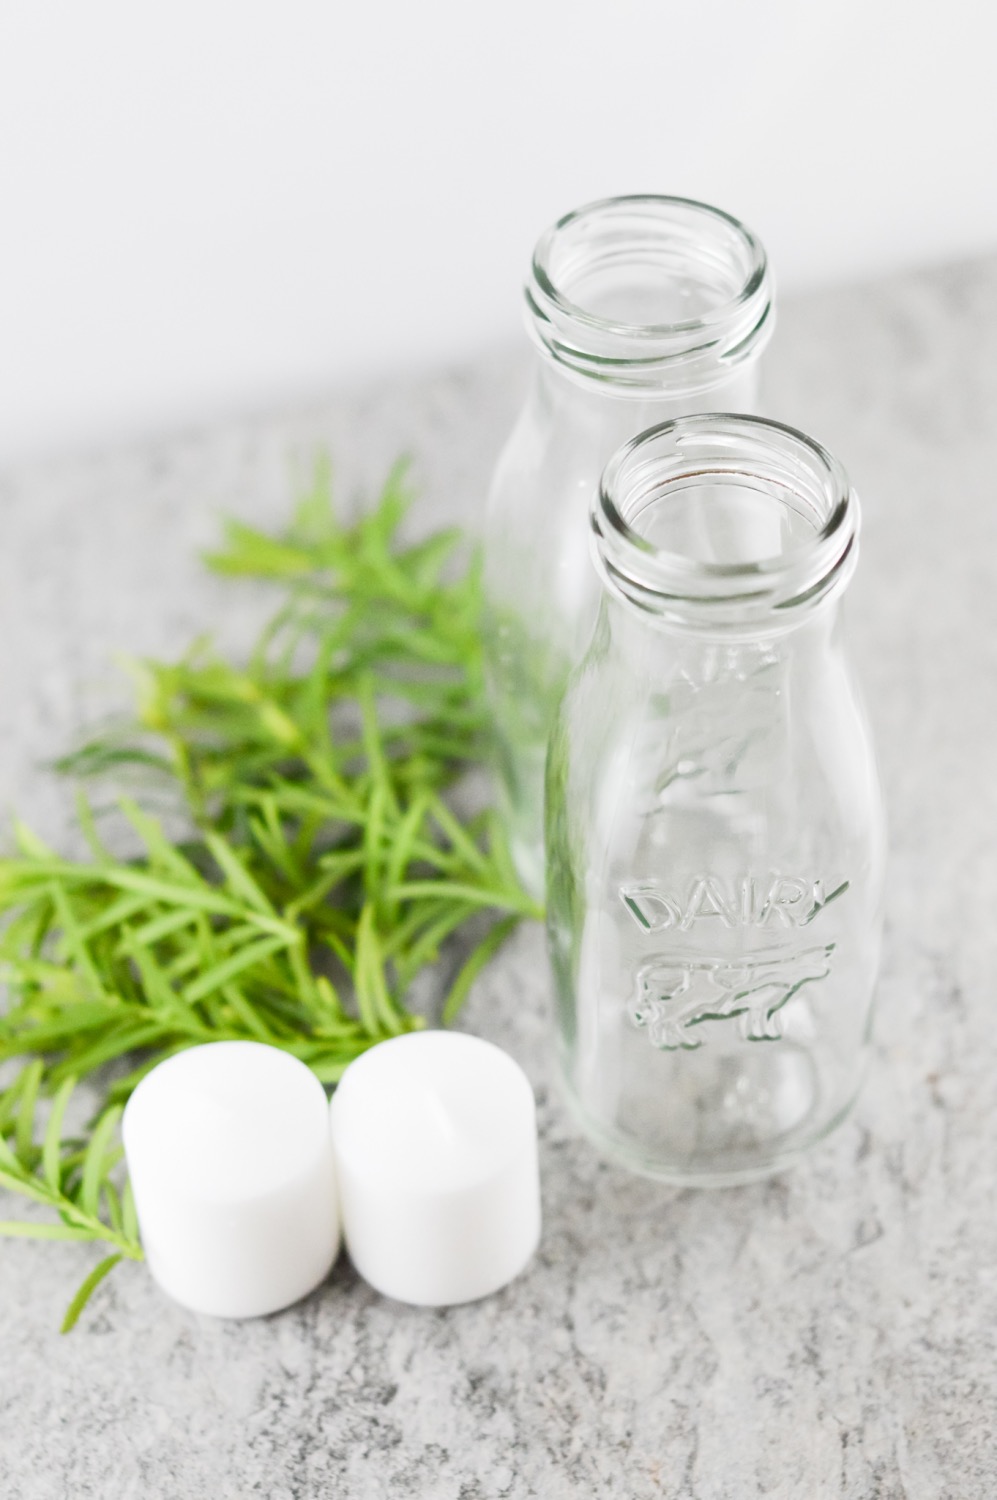 supplies diy water candles with fresh herbs pop shop america